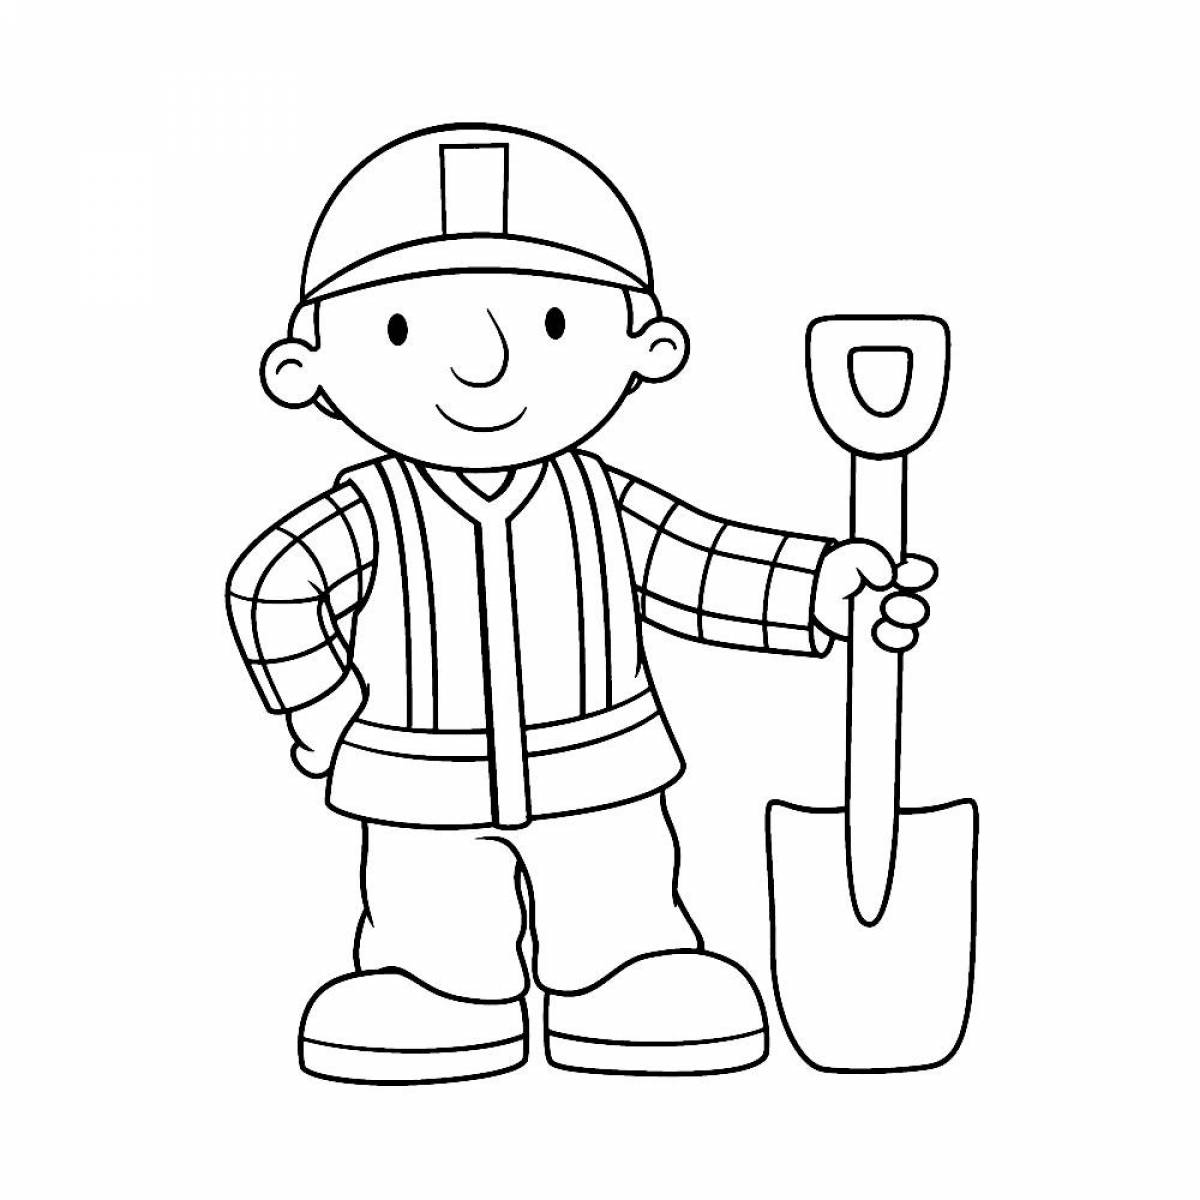 Colour-themed coloring page maker